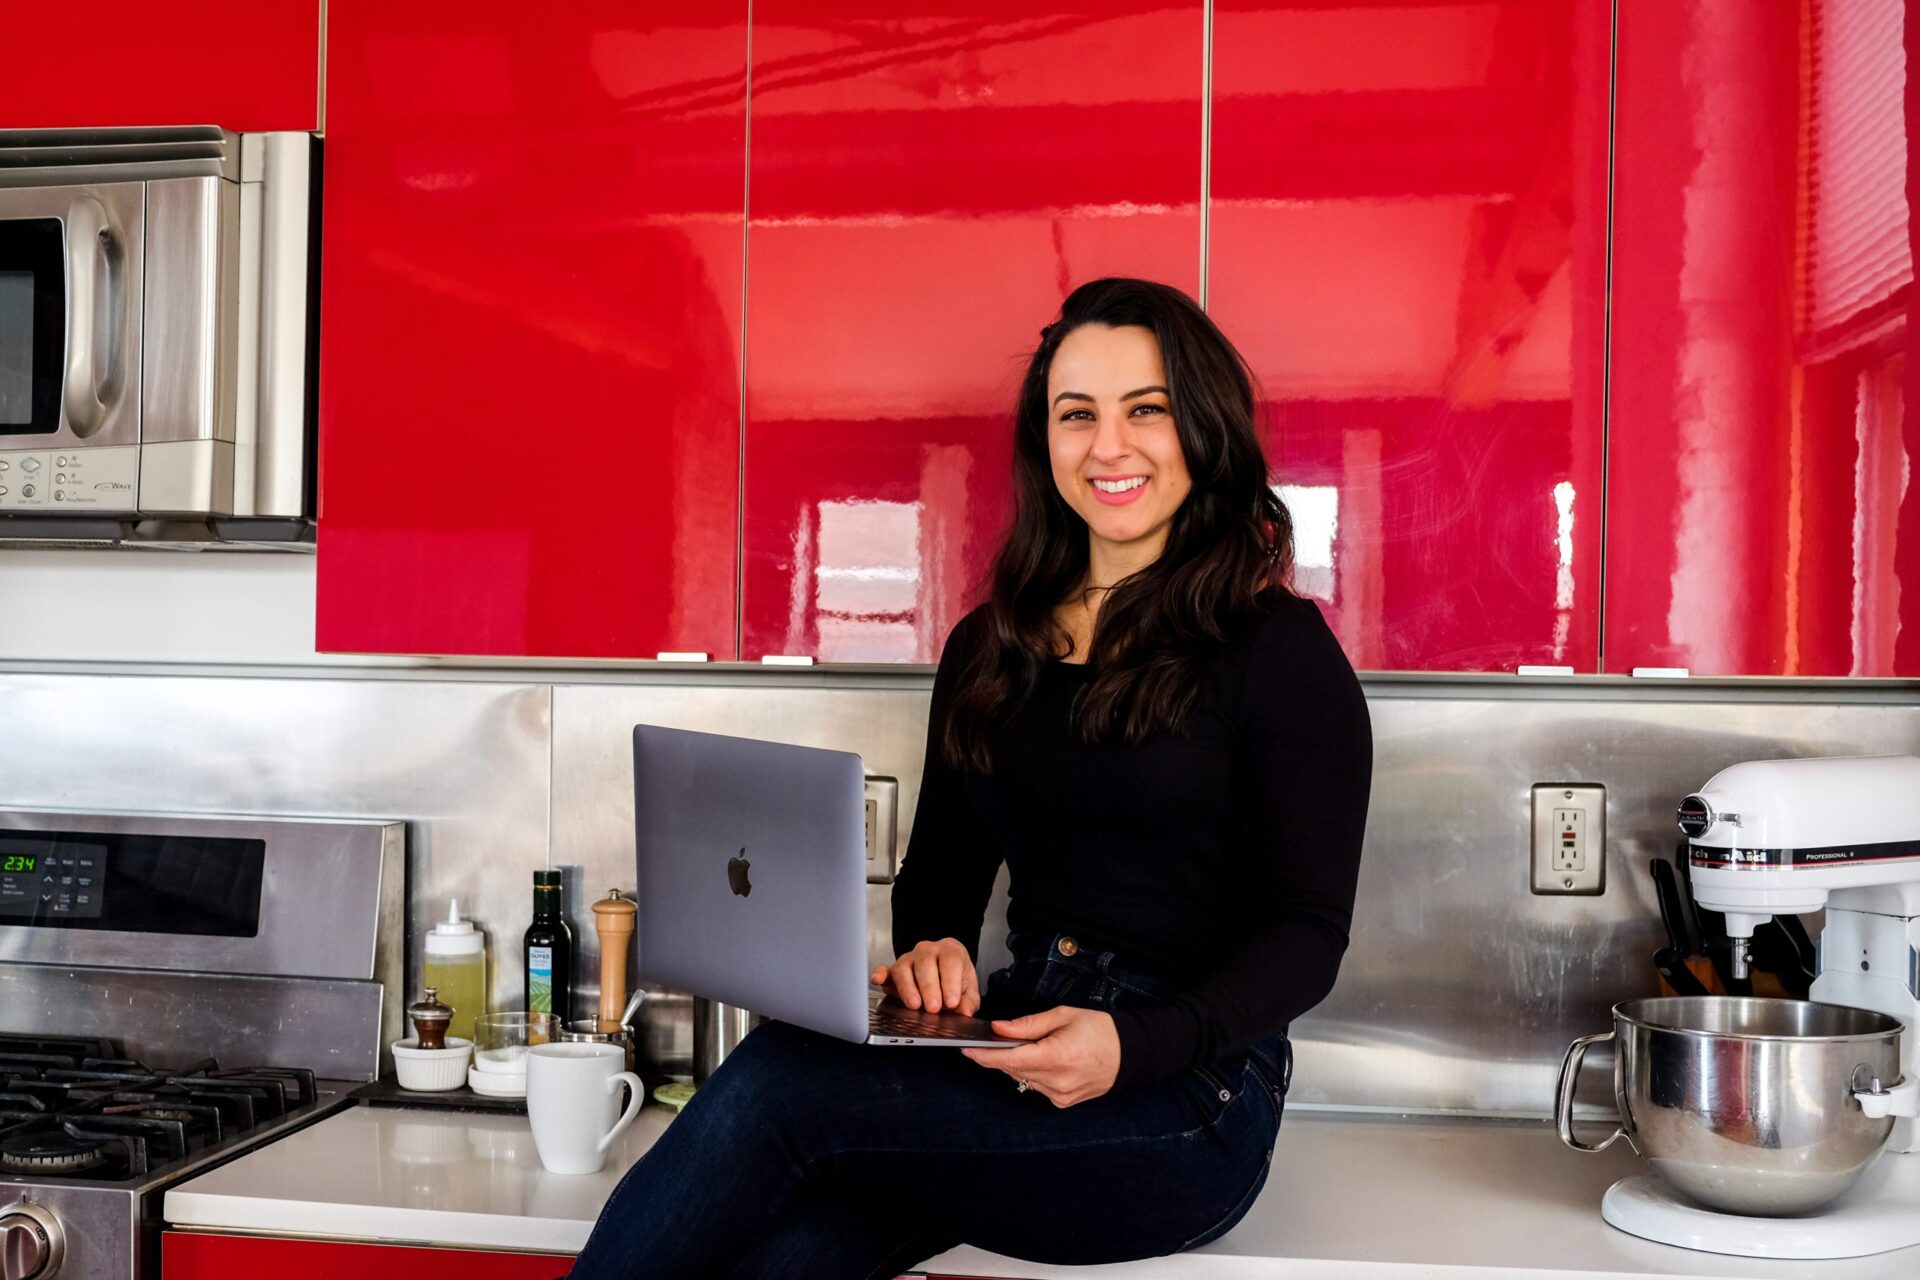 woman registered dietitian nutritionist sitting on counter smiling with laptop computer